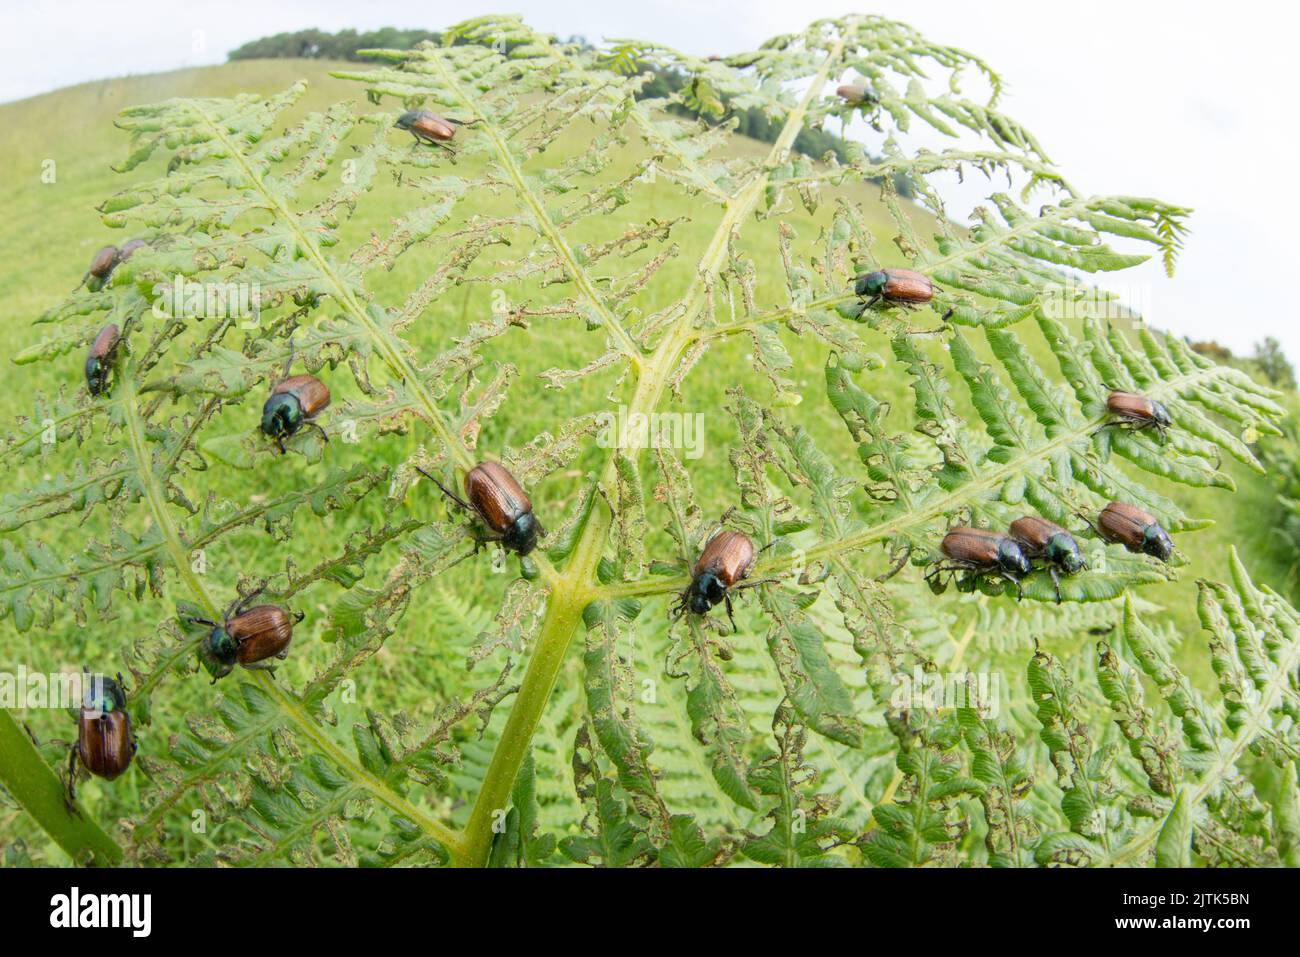 Bracken chafer beetles often occur in large numbers, as shown here in this ultra-wide macro shot of them on their host plant. Stock Photo